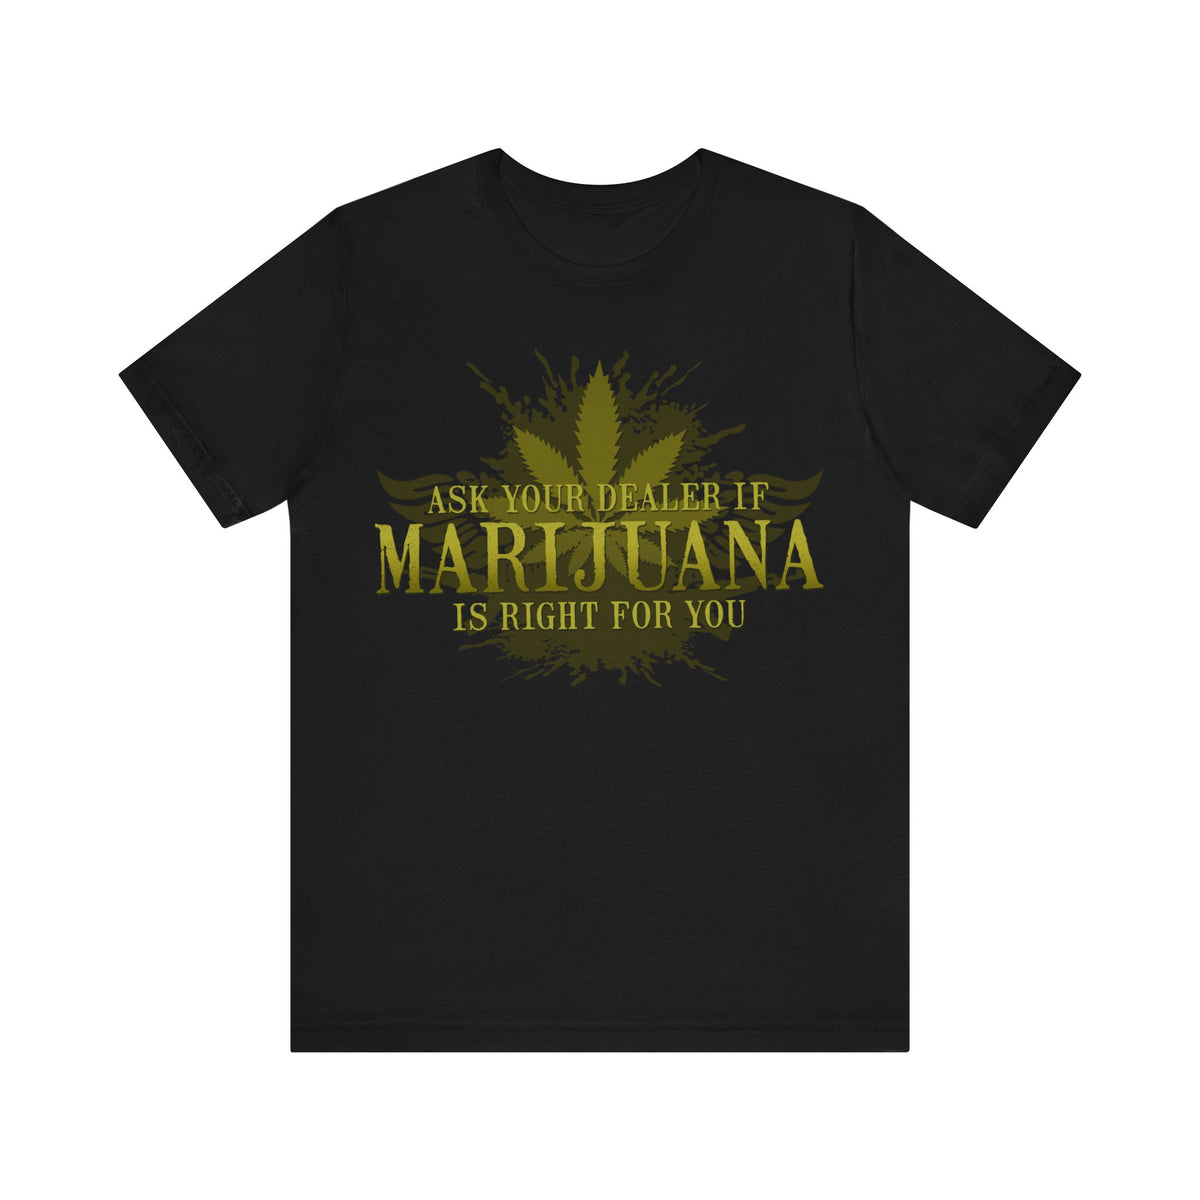 Ask Your Dealer If Marijuana Is Right For You - Men's T-Shirt